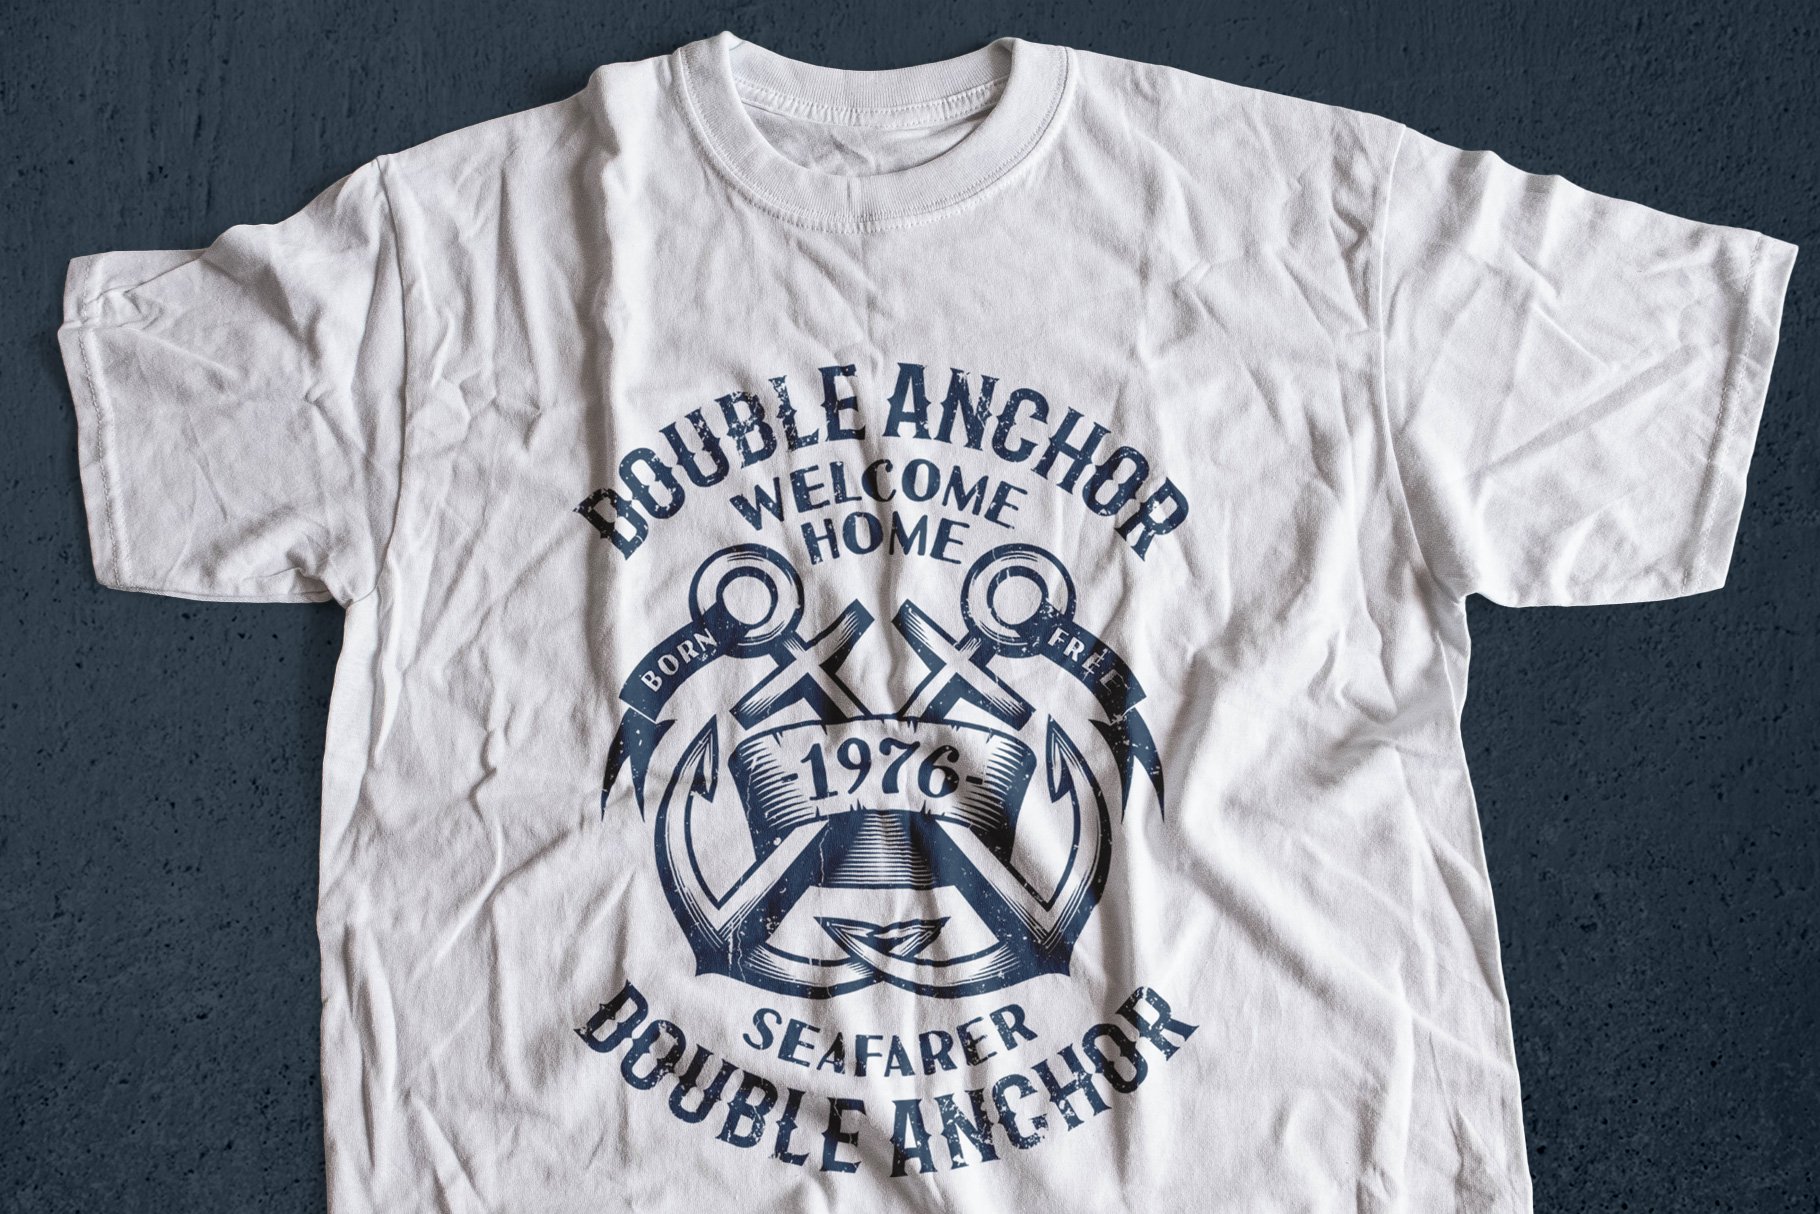 White t-shirt with a grey anchor print.